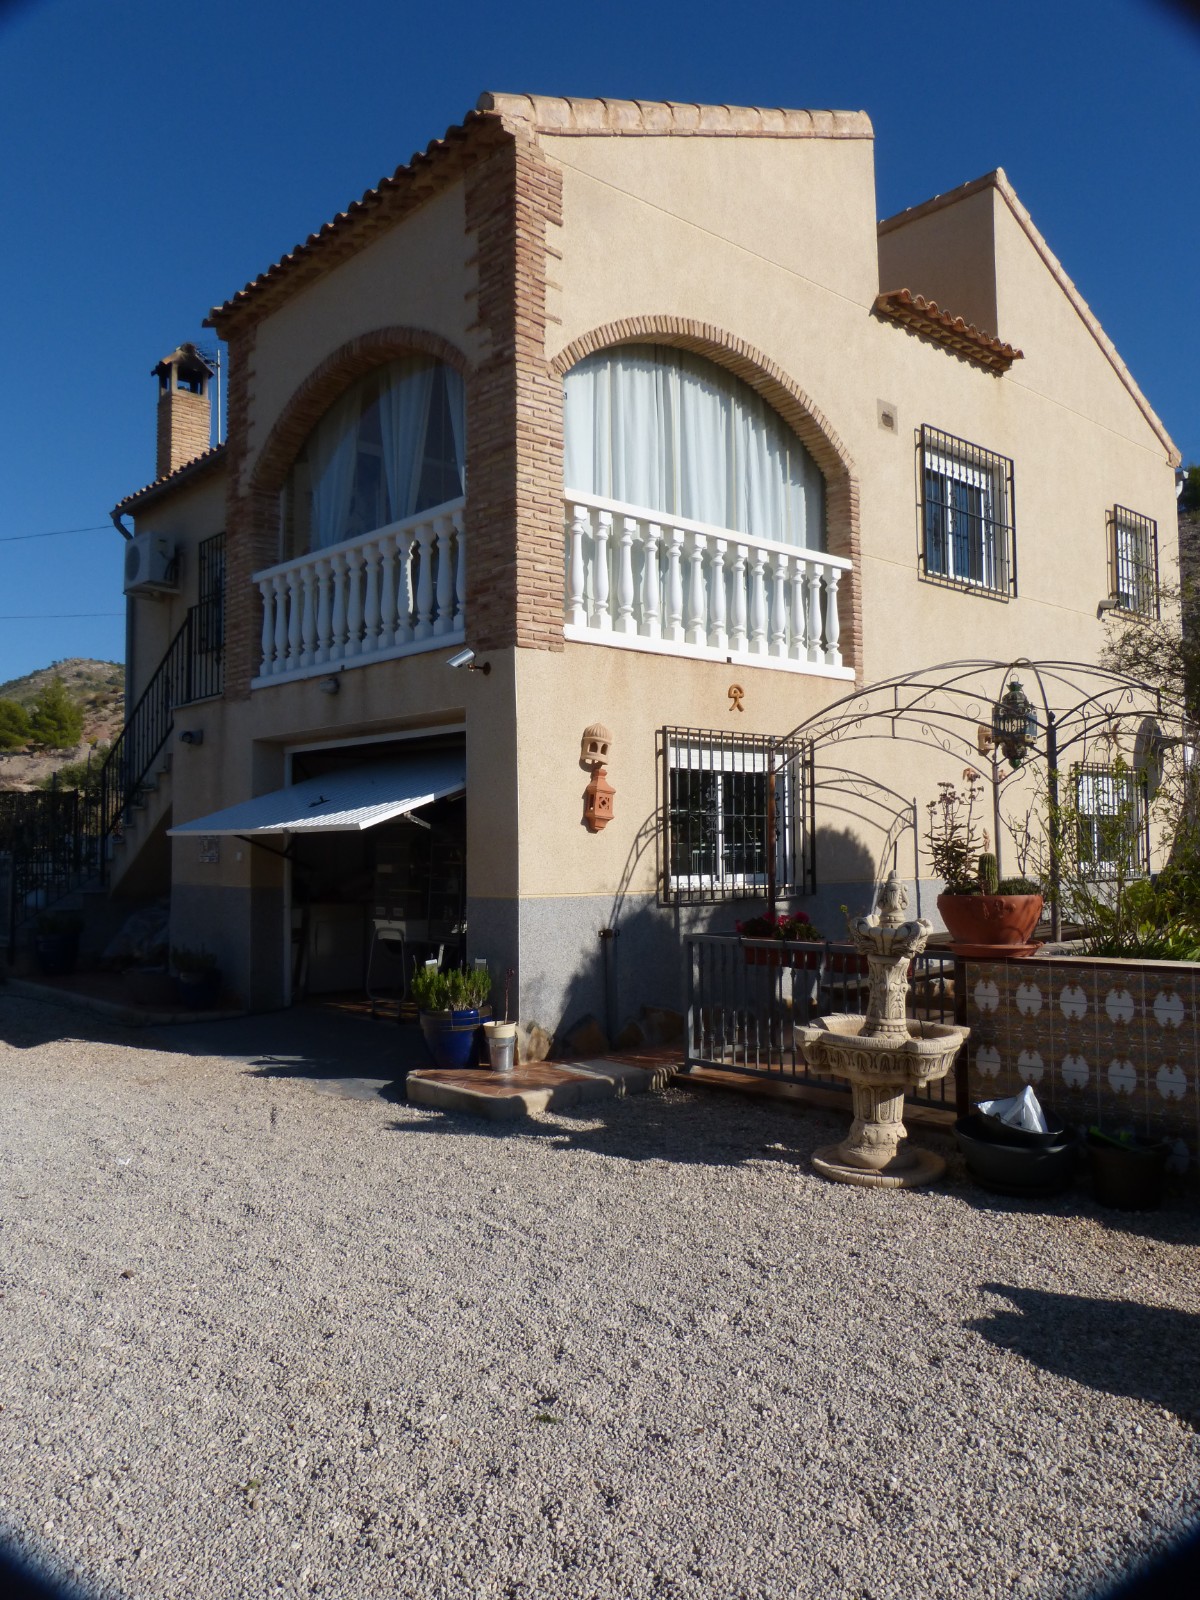 For sale: 3 bedroom house / villa in Fortuna